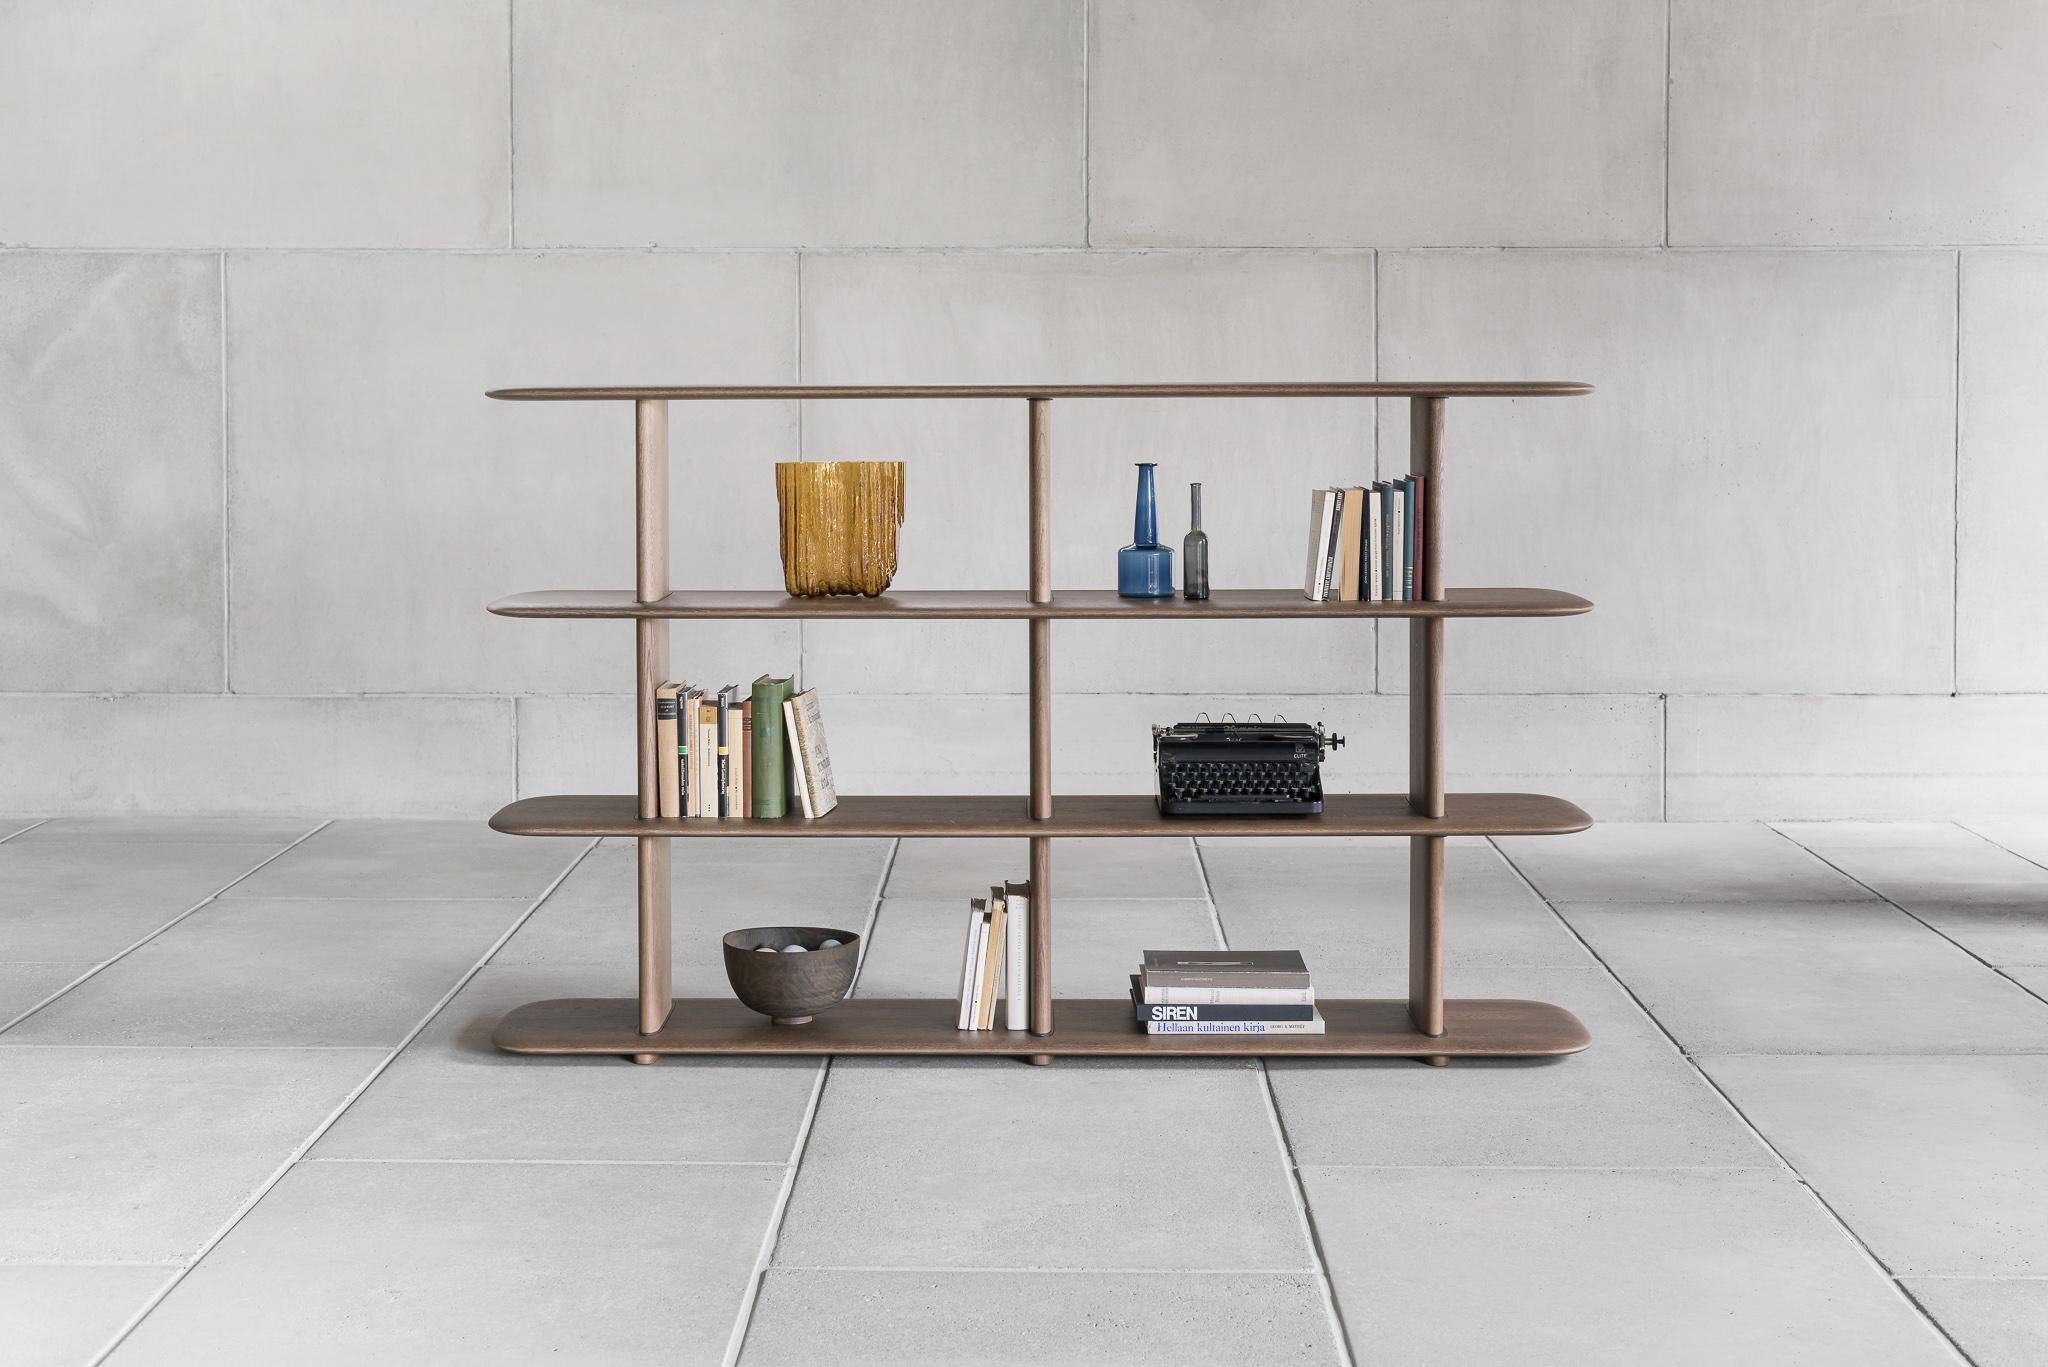 Graceful and poetic, yet robust, is its designers' description what the Poeme Shelf is all about. Designed by the Poiat Studio's co-founders, Timo Mikkonen and Antti Rouhunkoski, the shelf derives its influences from many different aspects and